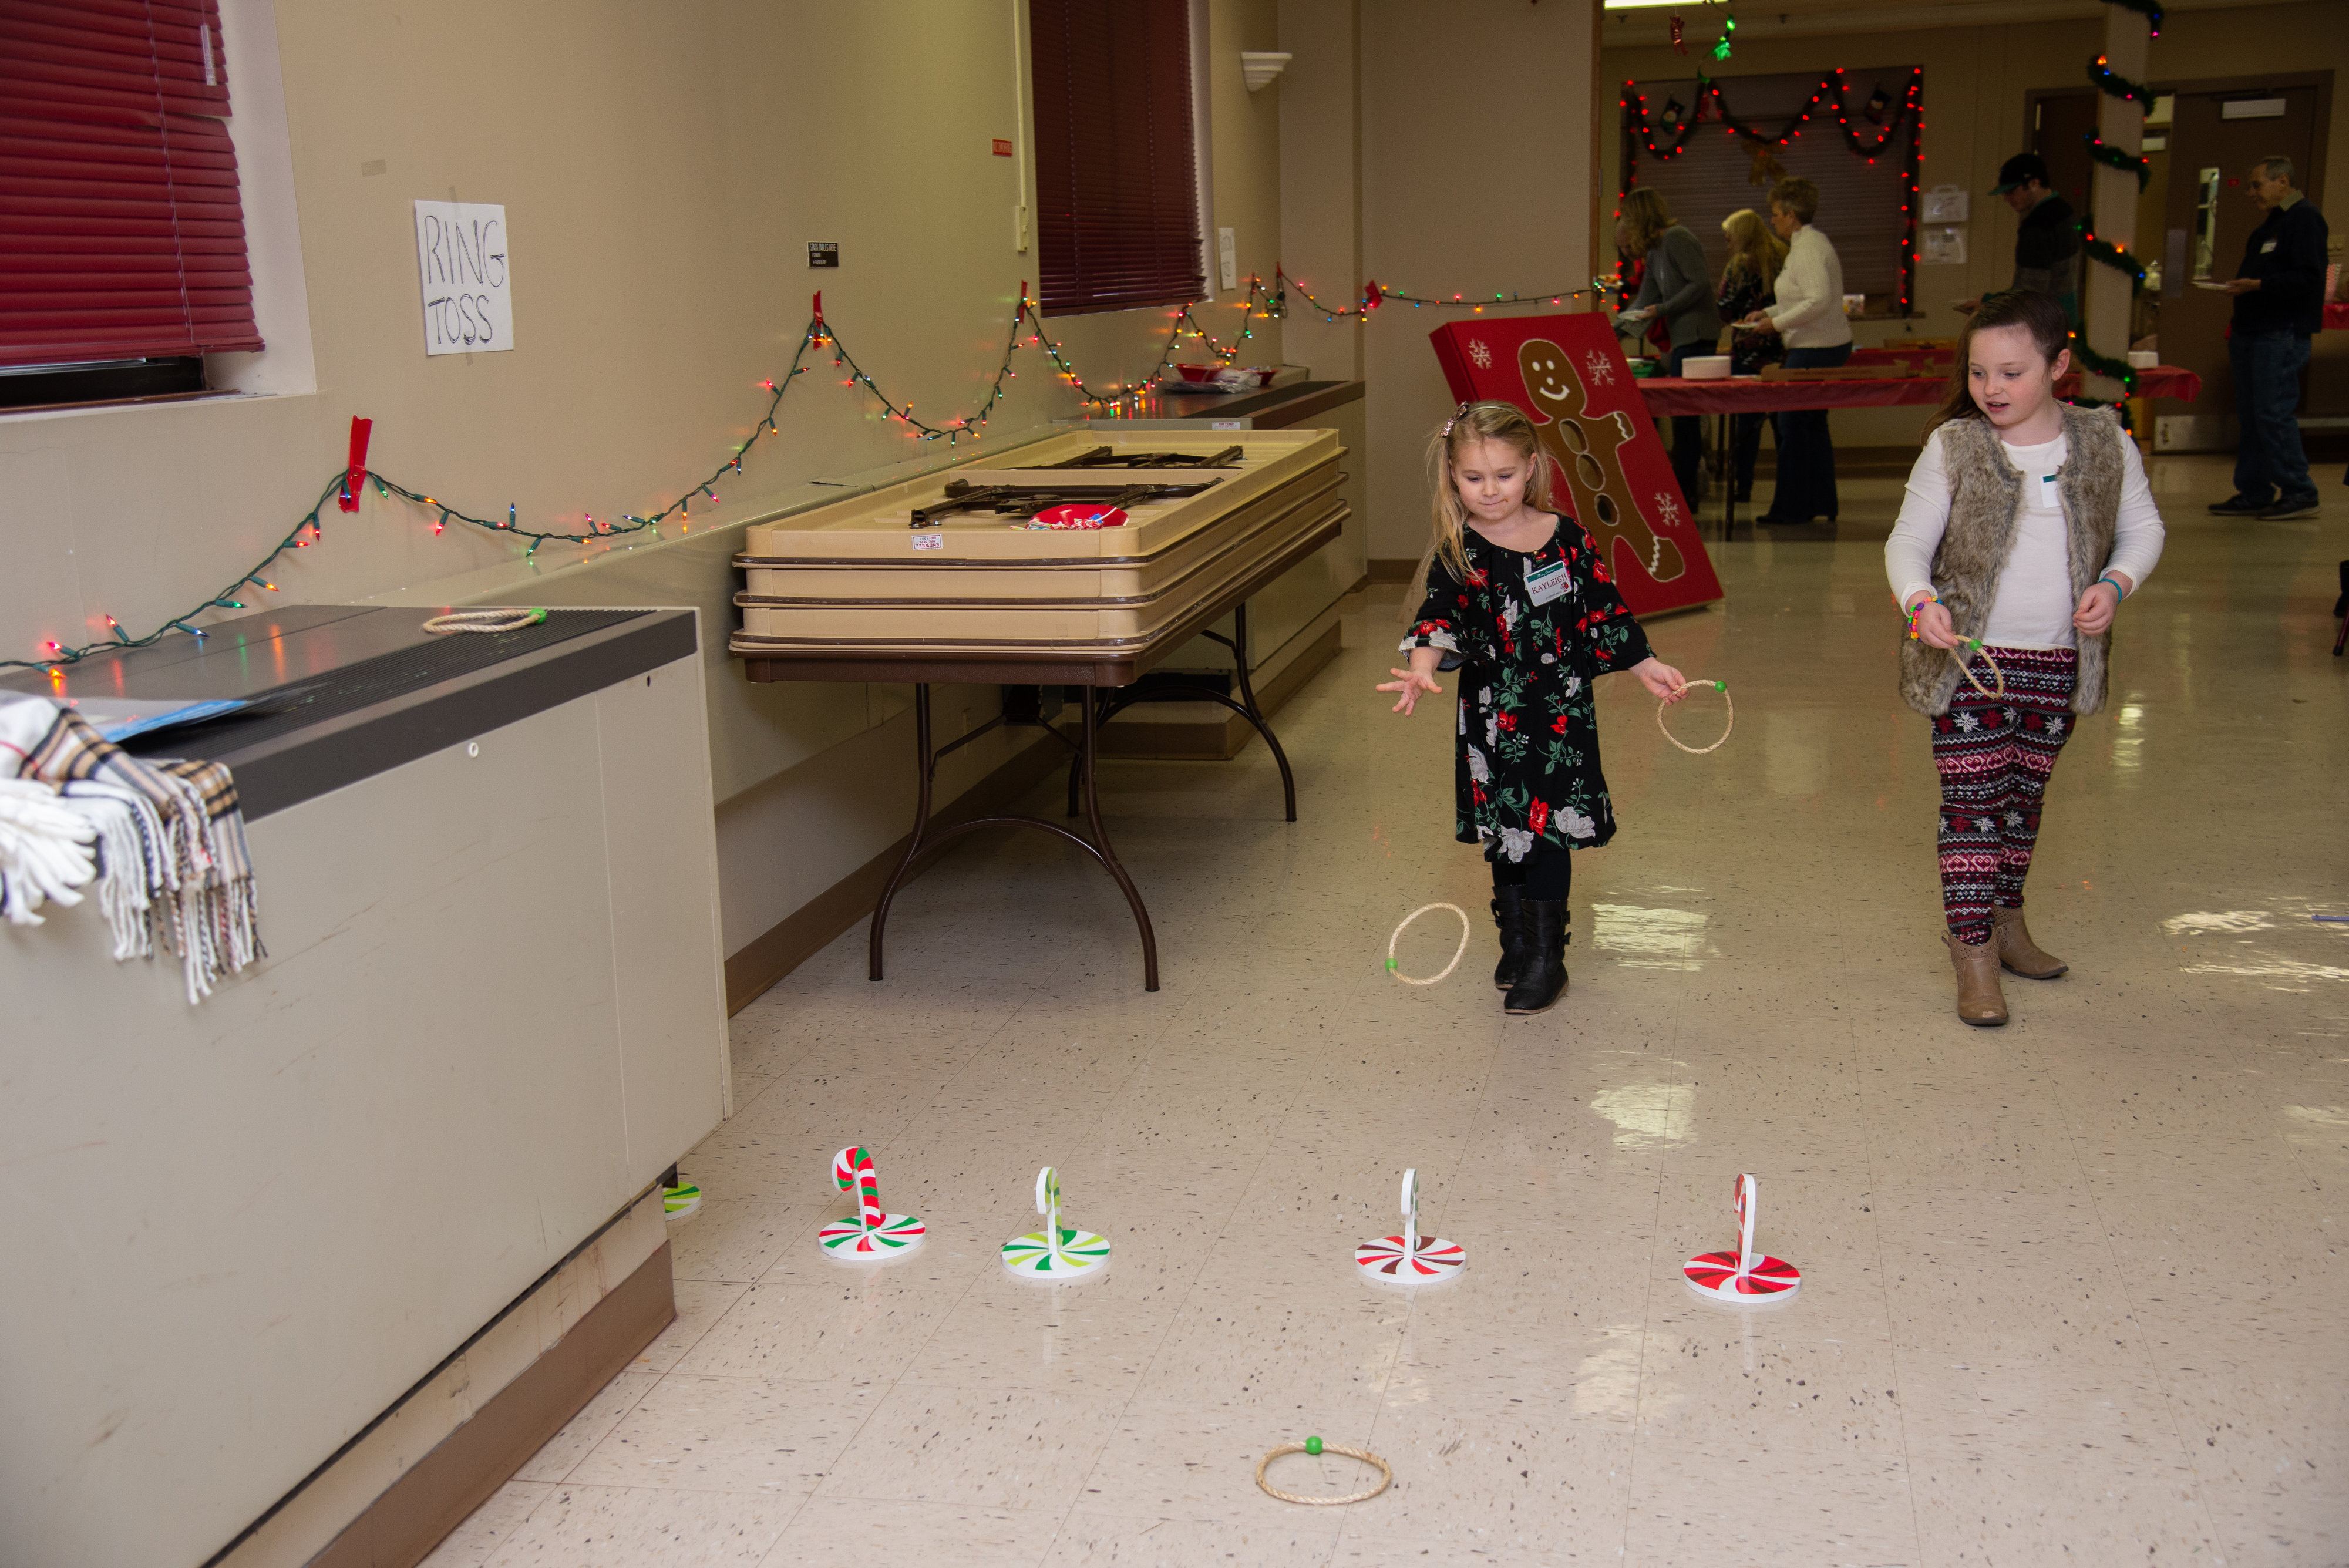 12-15-18  Other - Childrens Christmas Party